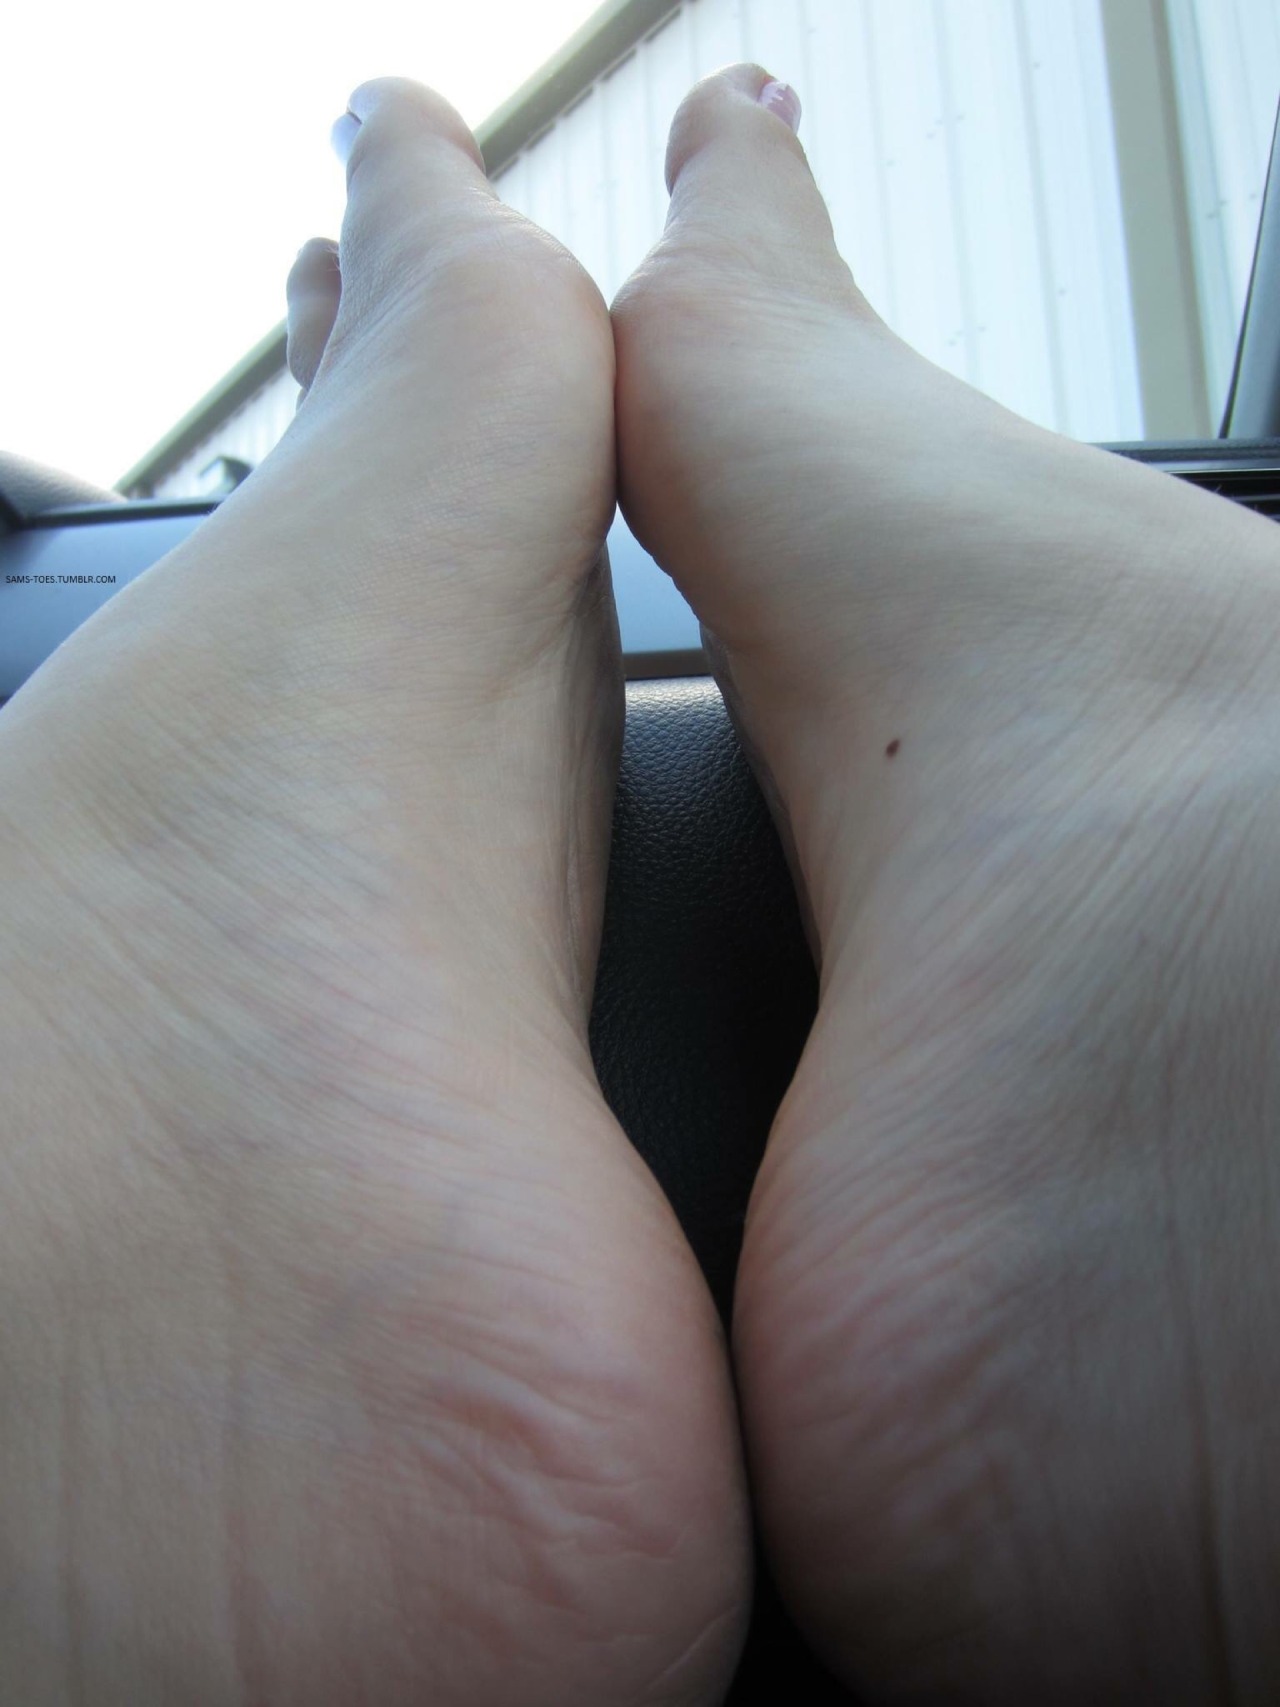 sams-toes:  My poor tired feet spent the whole day walking around getting dirty and